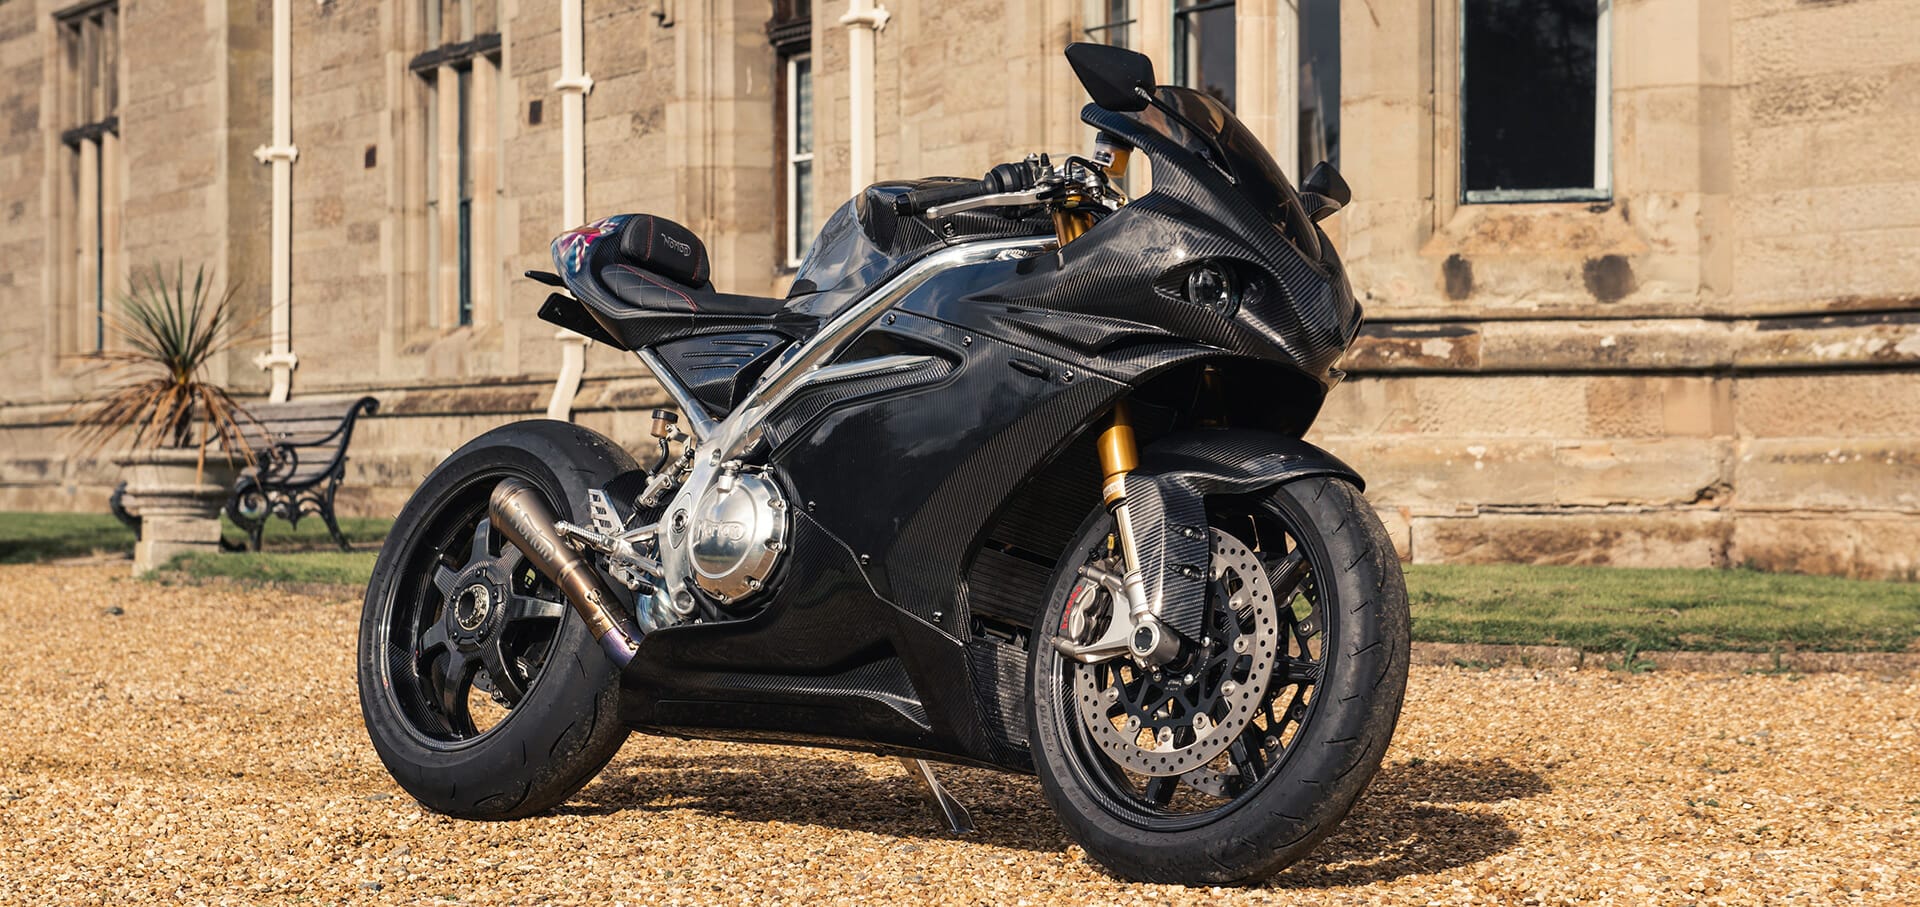 Norton announces revised V4SS
- also in the MOTORCYCLES.NEWS APP